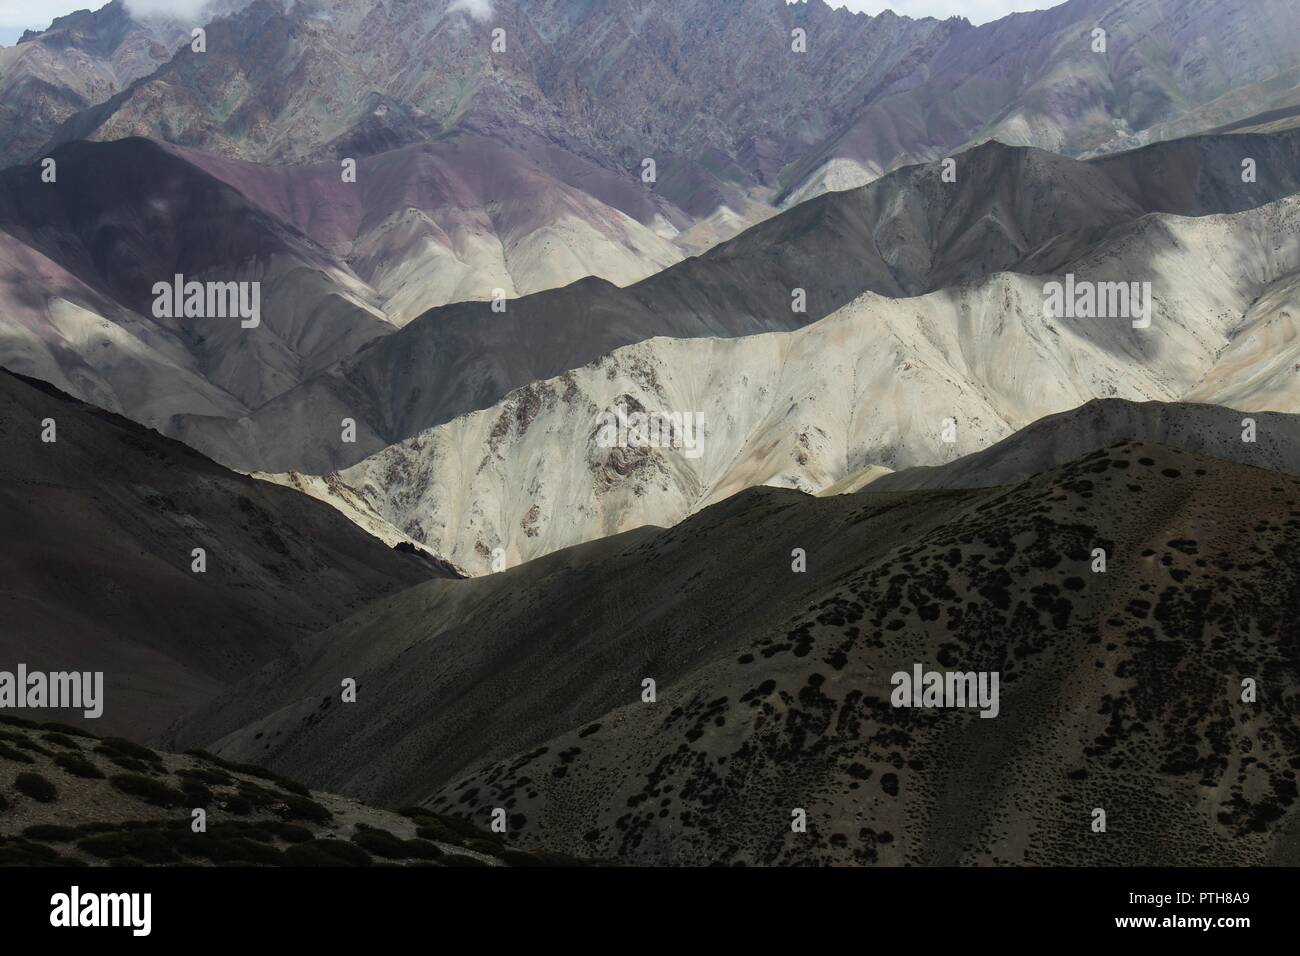 Spectacular views in the Himalayas Stock Photo